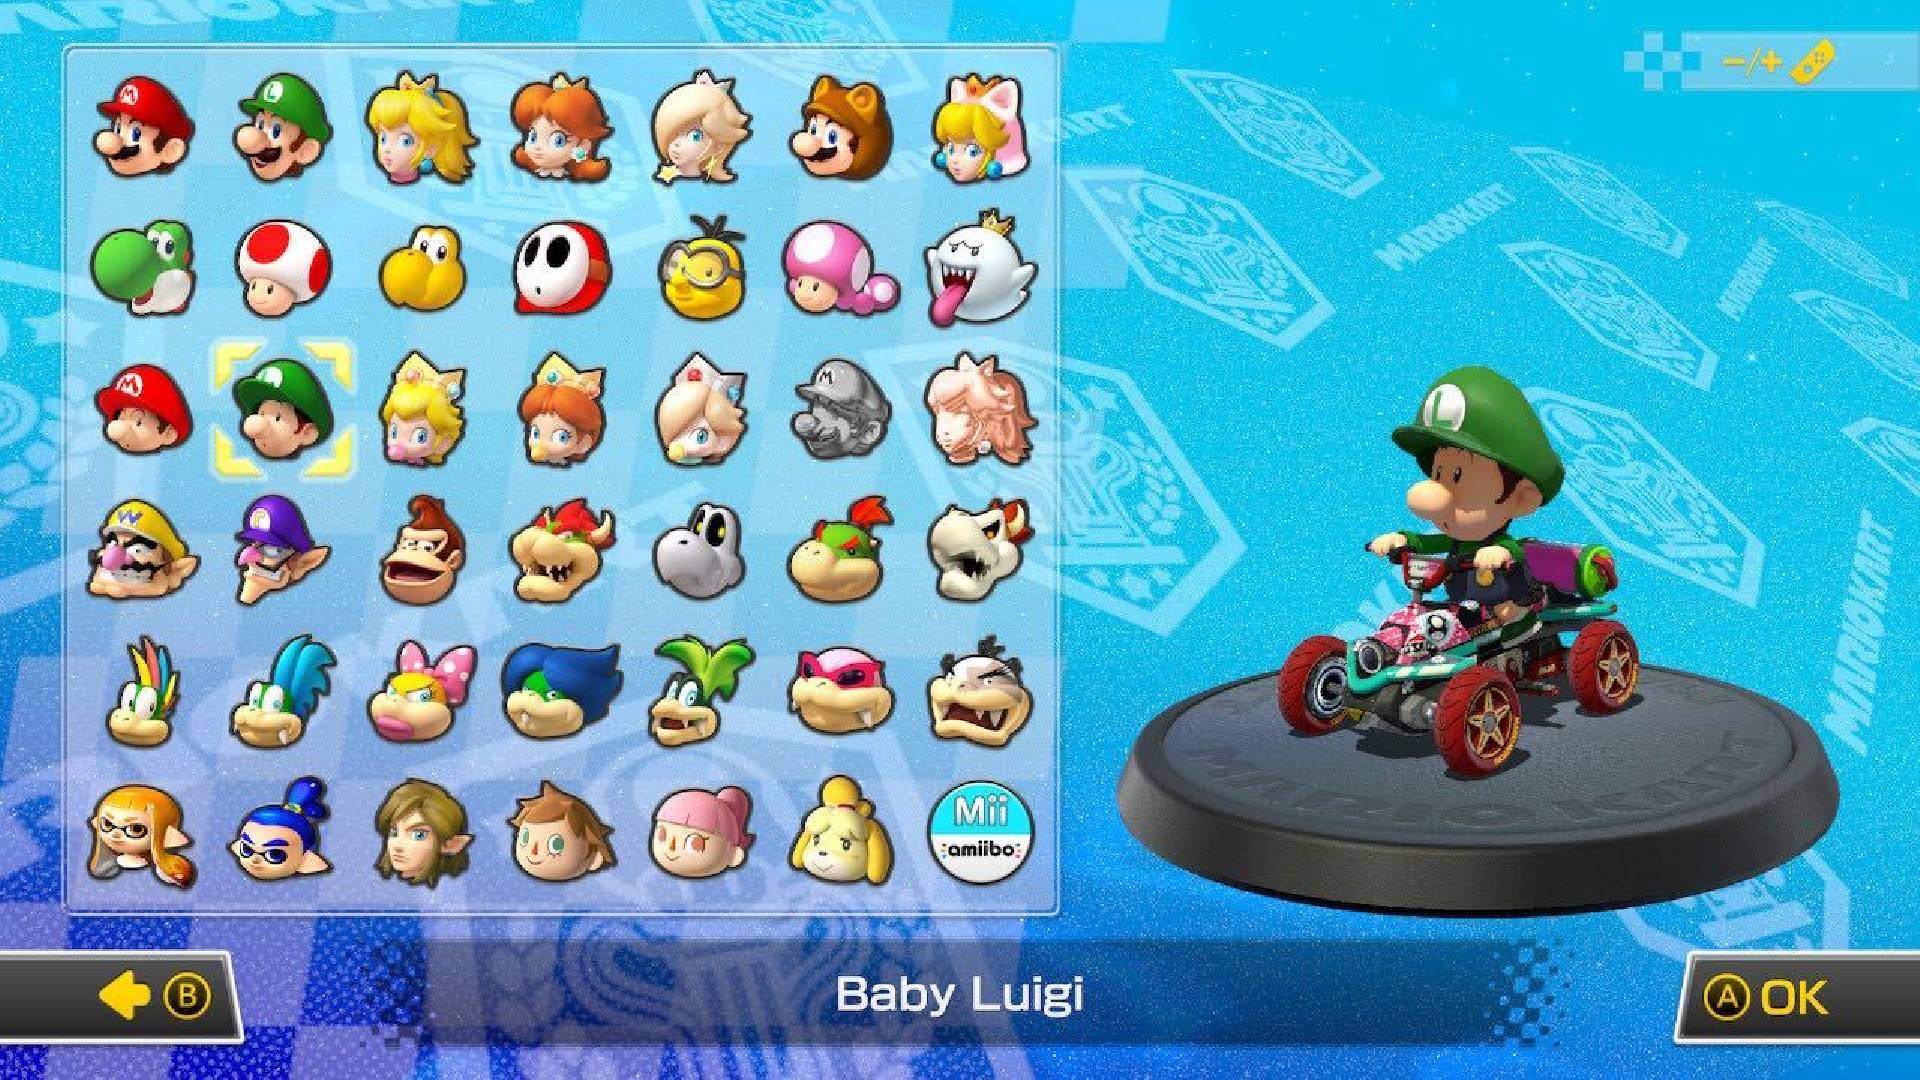 Baby Luigi is visible on a character selection screen, sitting in a kart